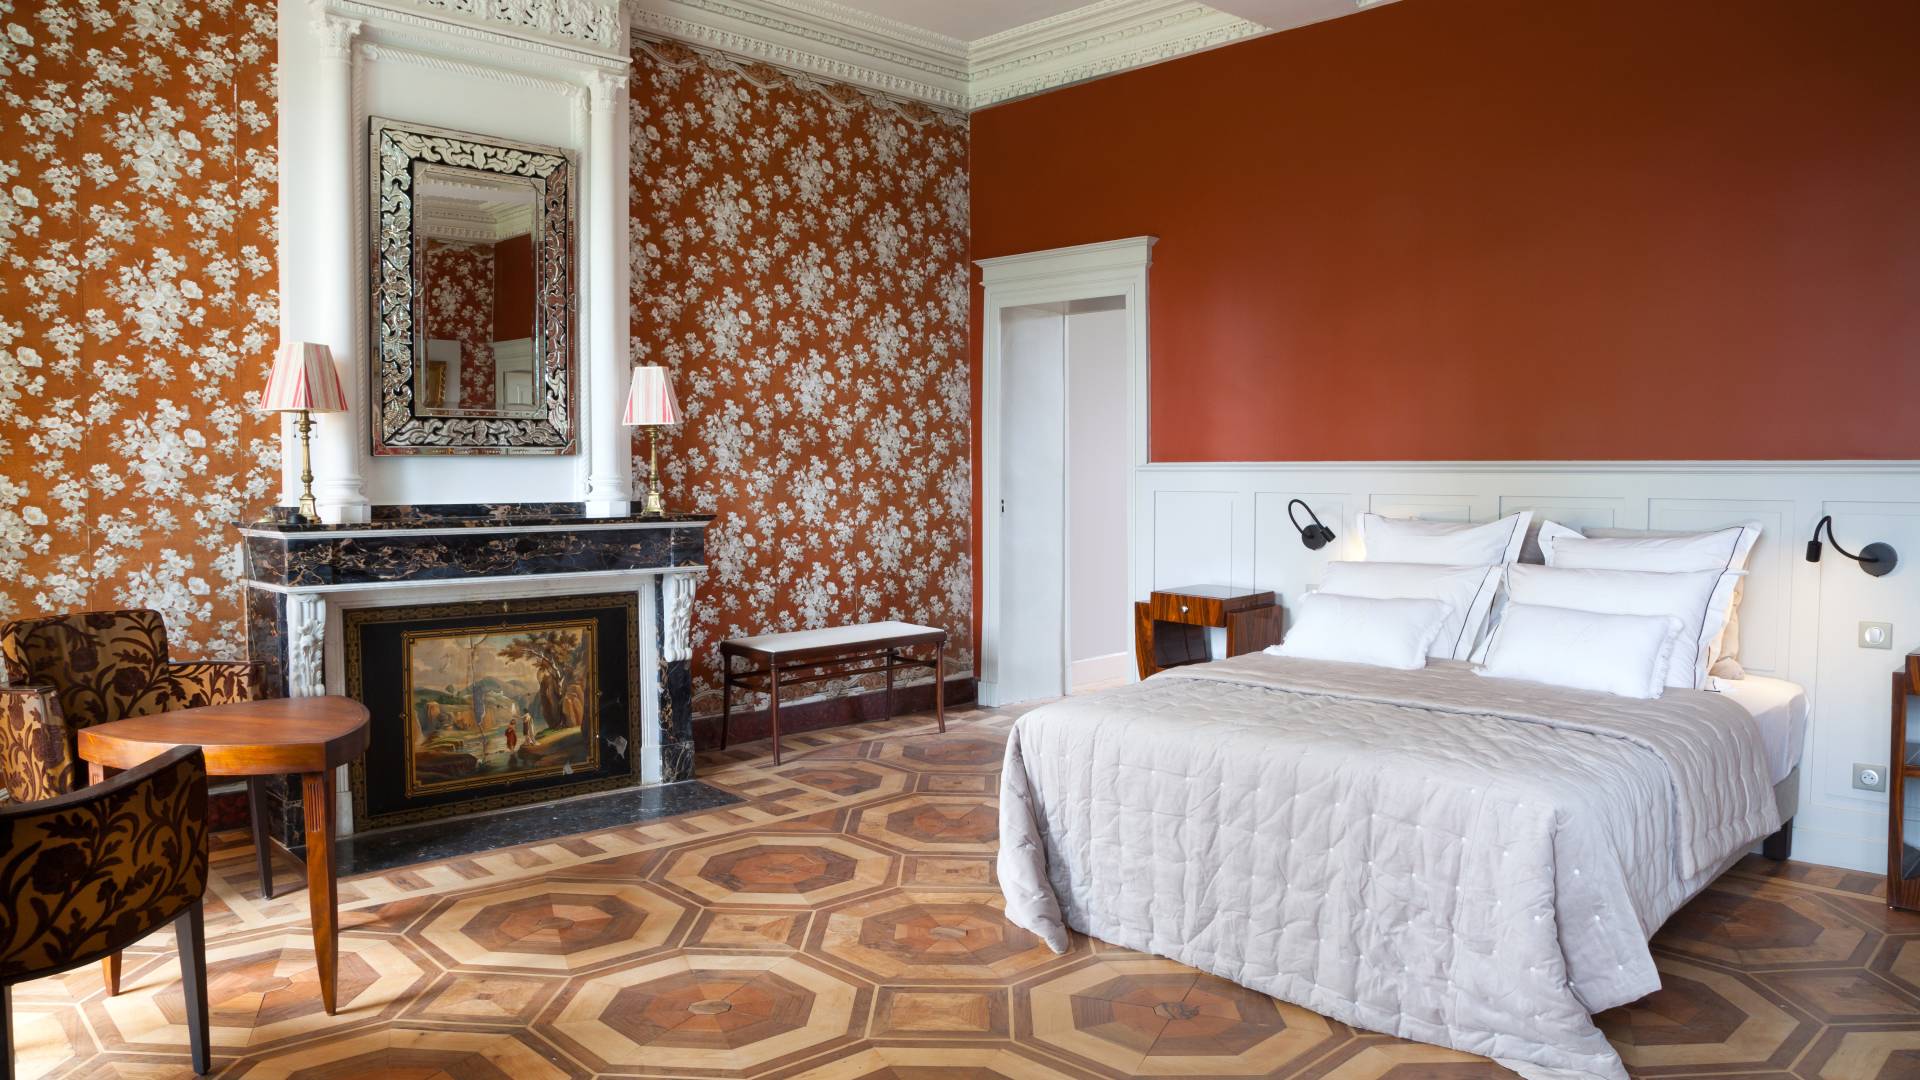 A bedroom decorated with varying patterns of burnt orange designs on the walls and floor with white, vintage crown molding.